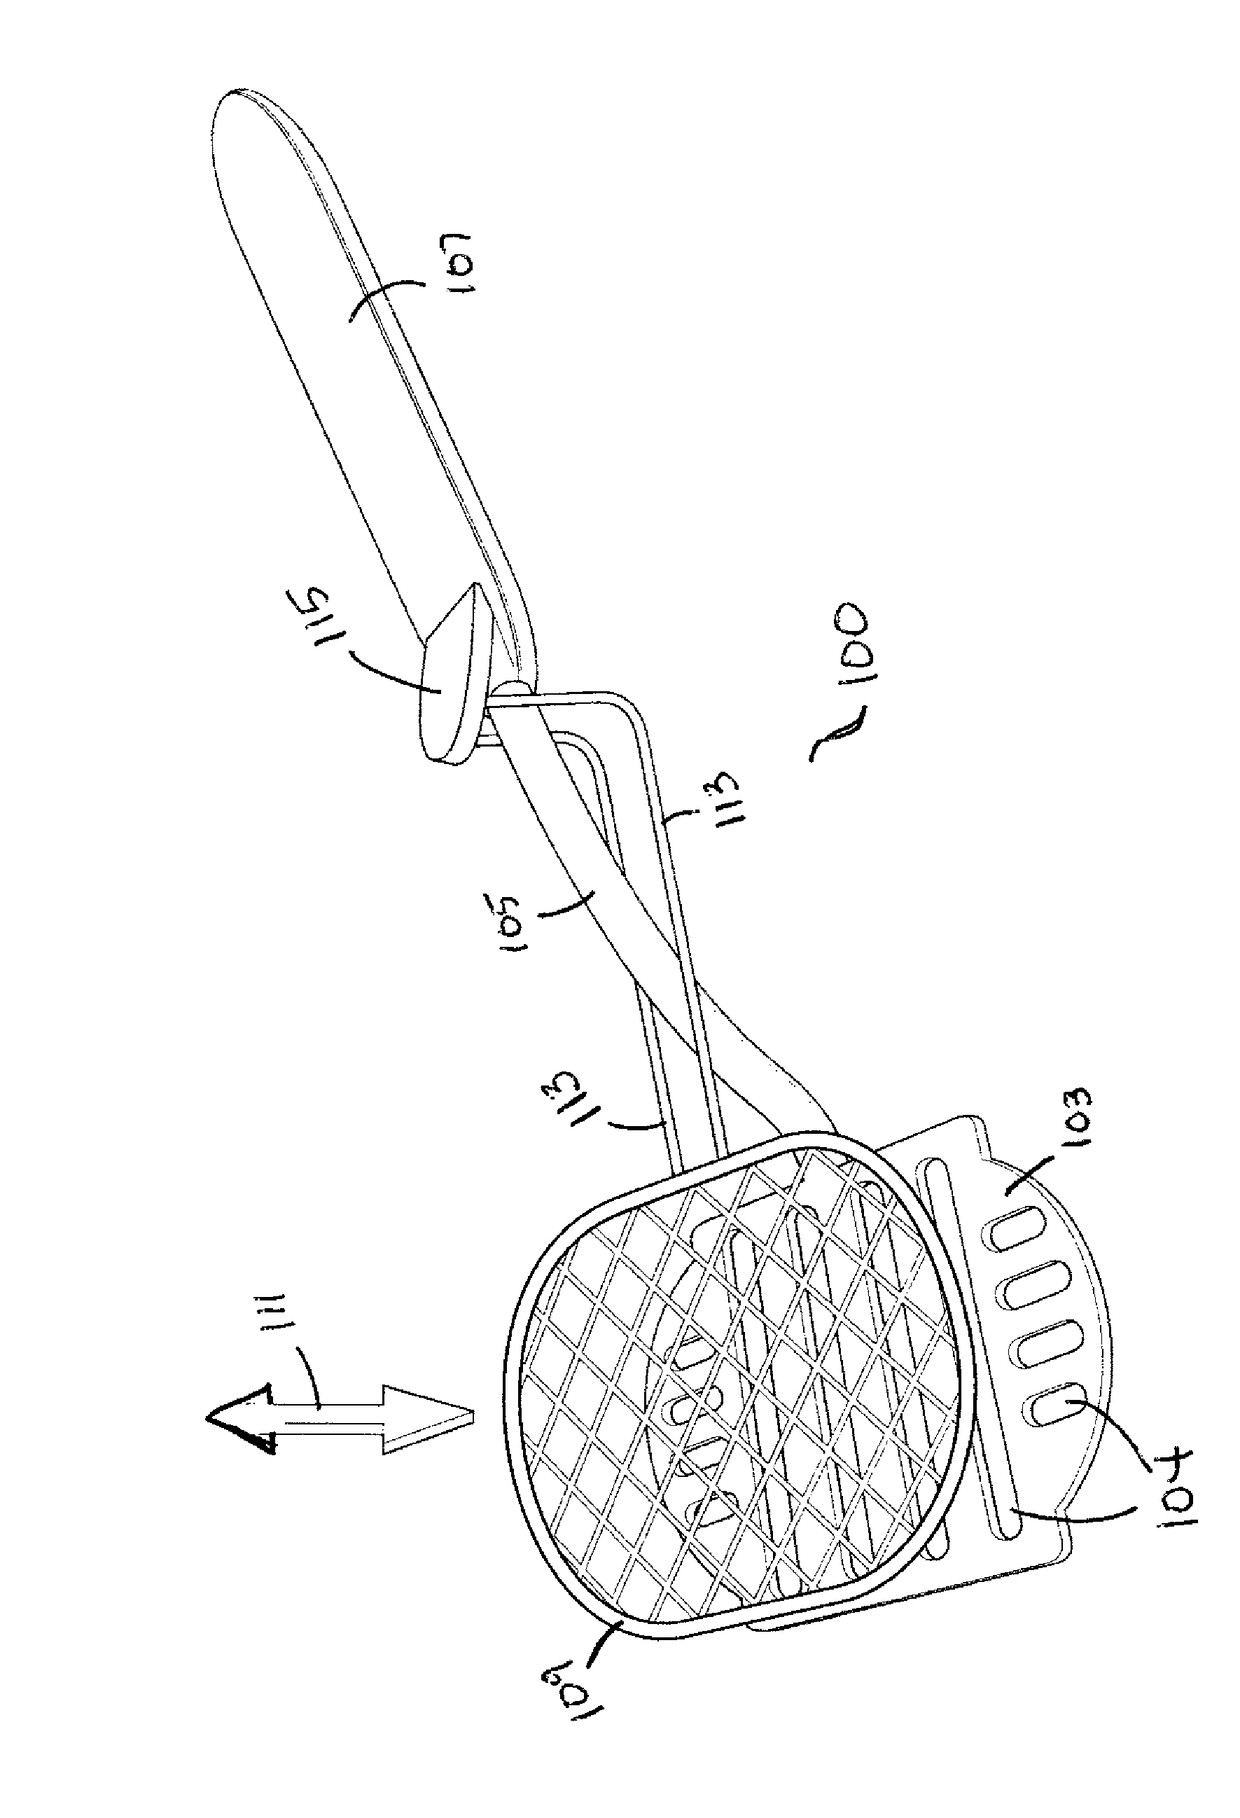 Apparatus for draining excess fluids from food